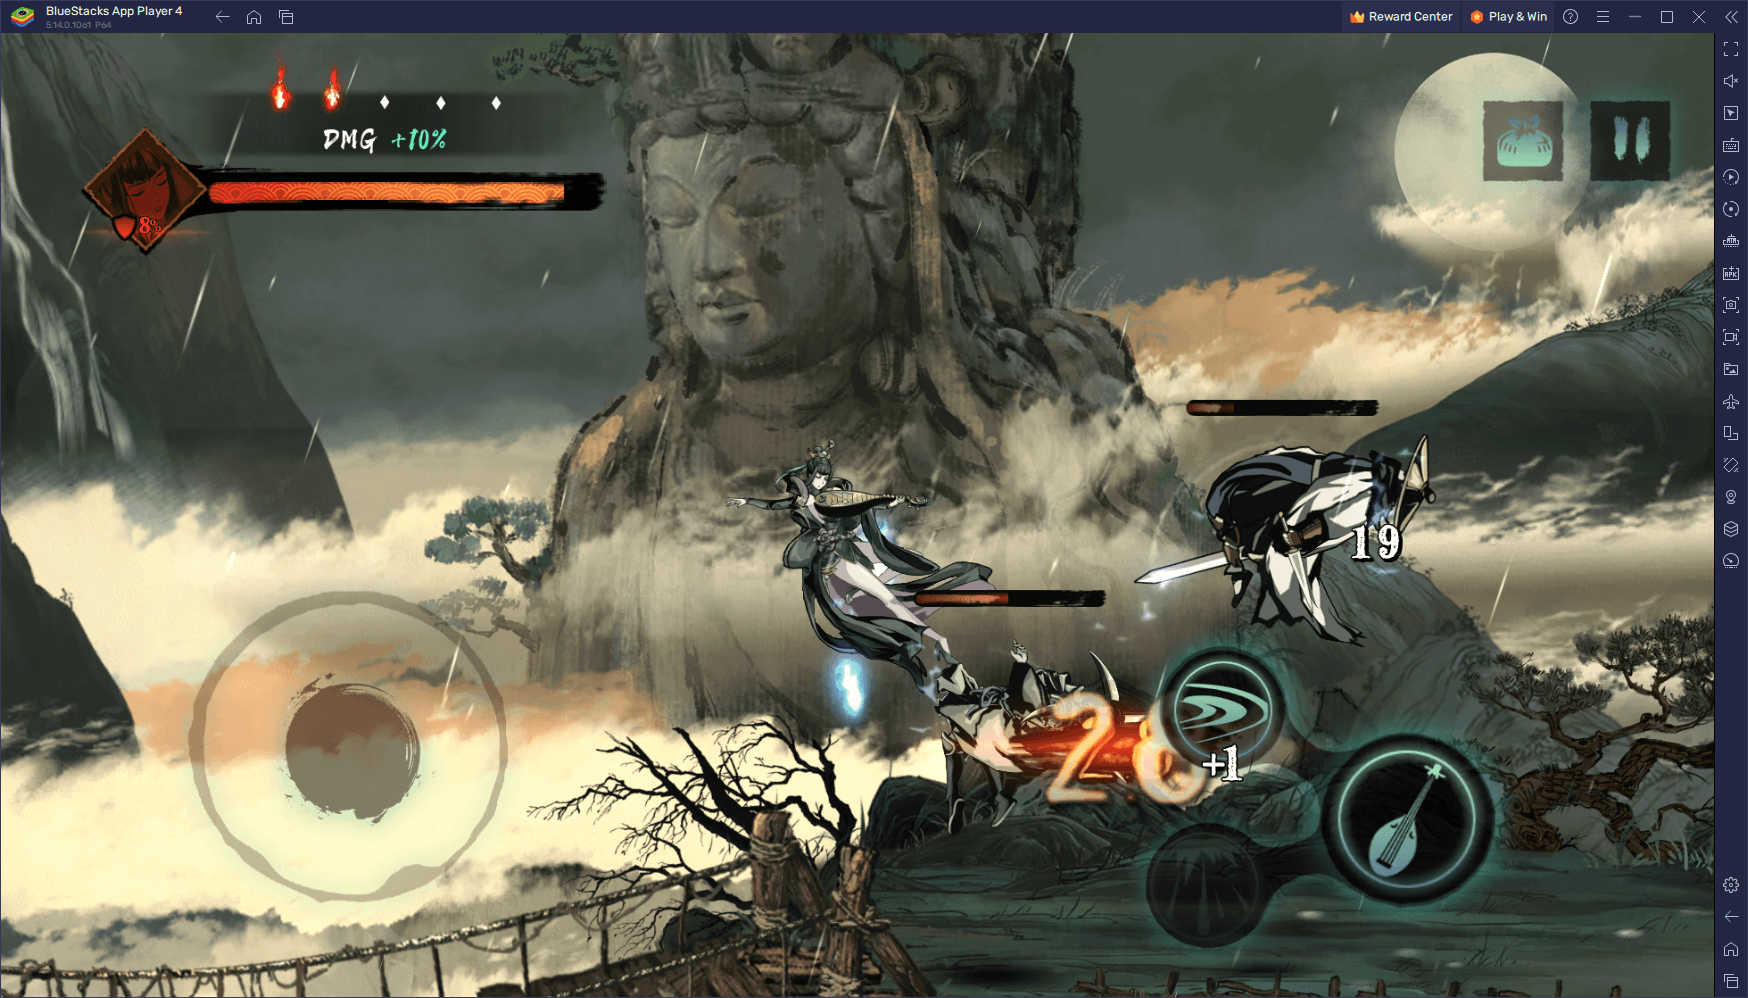 How to Play Phantom Blade: Executioners on PC With BlueStacks